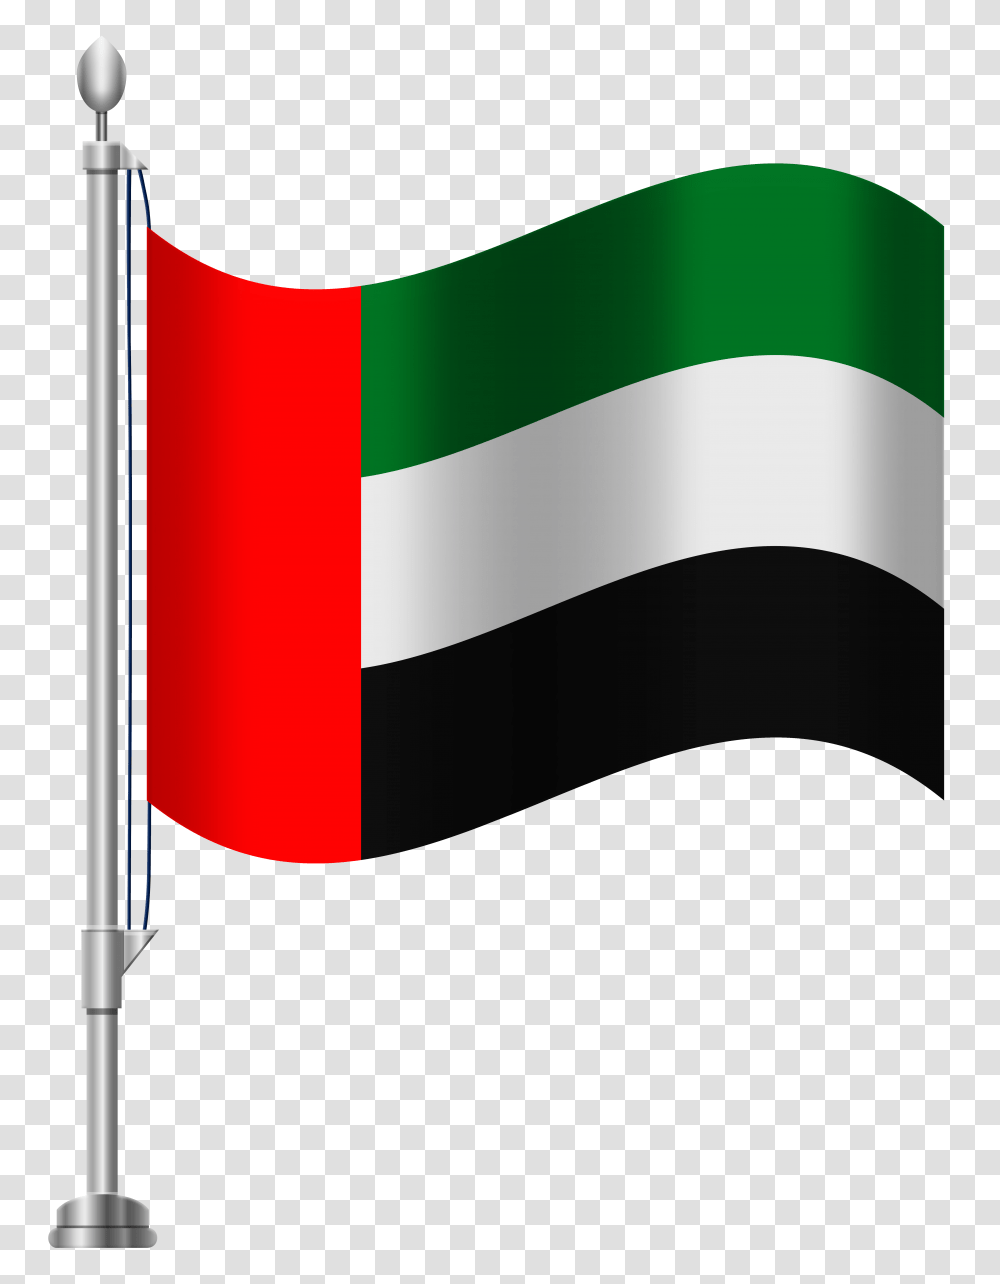 United Arab Emirates Flag Clip Art Clipart House, Axe, Tool, American Flag Transparent Png